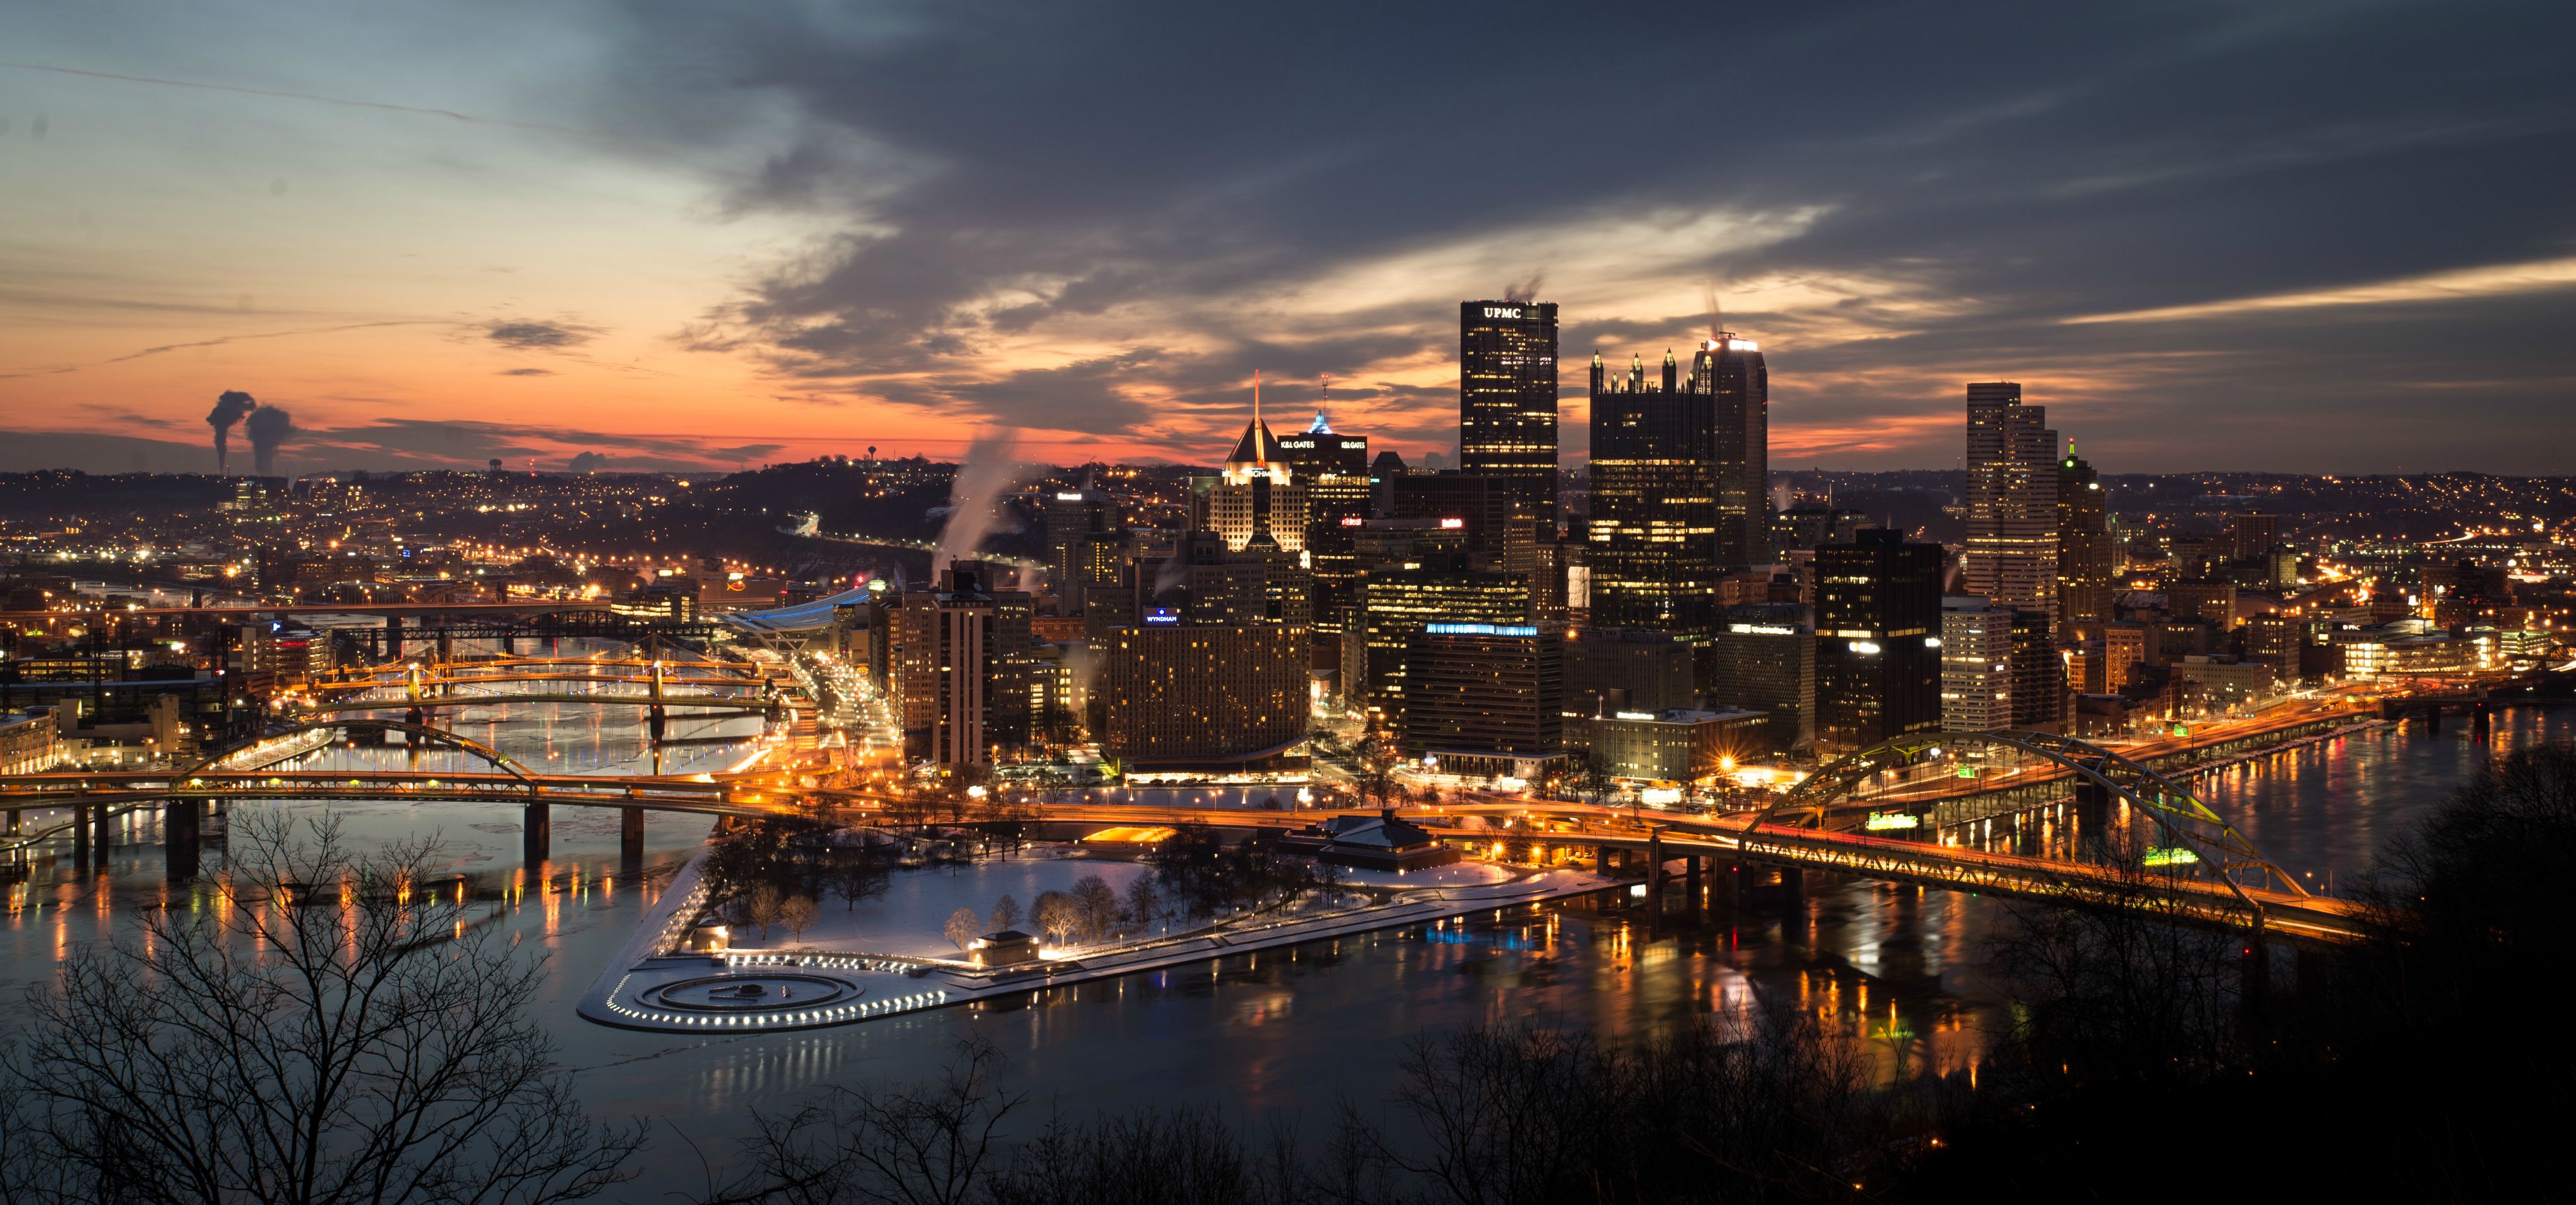 Sunrise Picture From My Trip To Pittsburgh This Past Weekend Hope